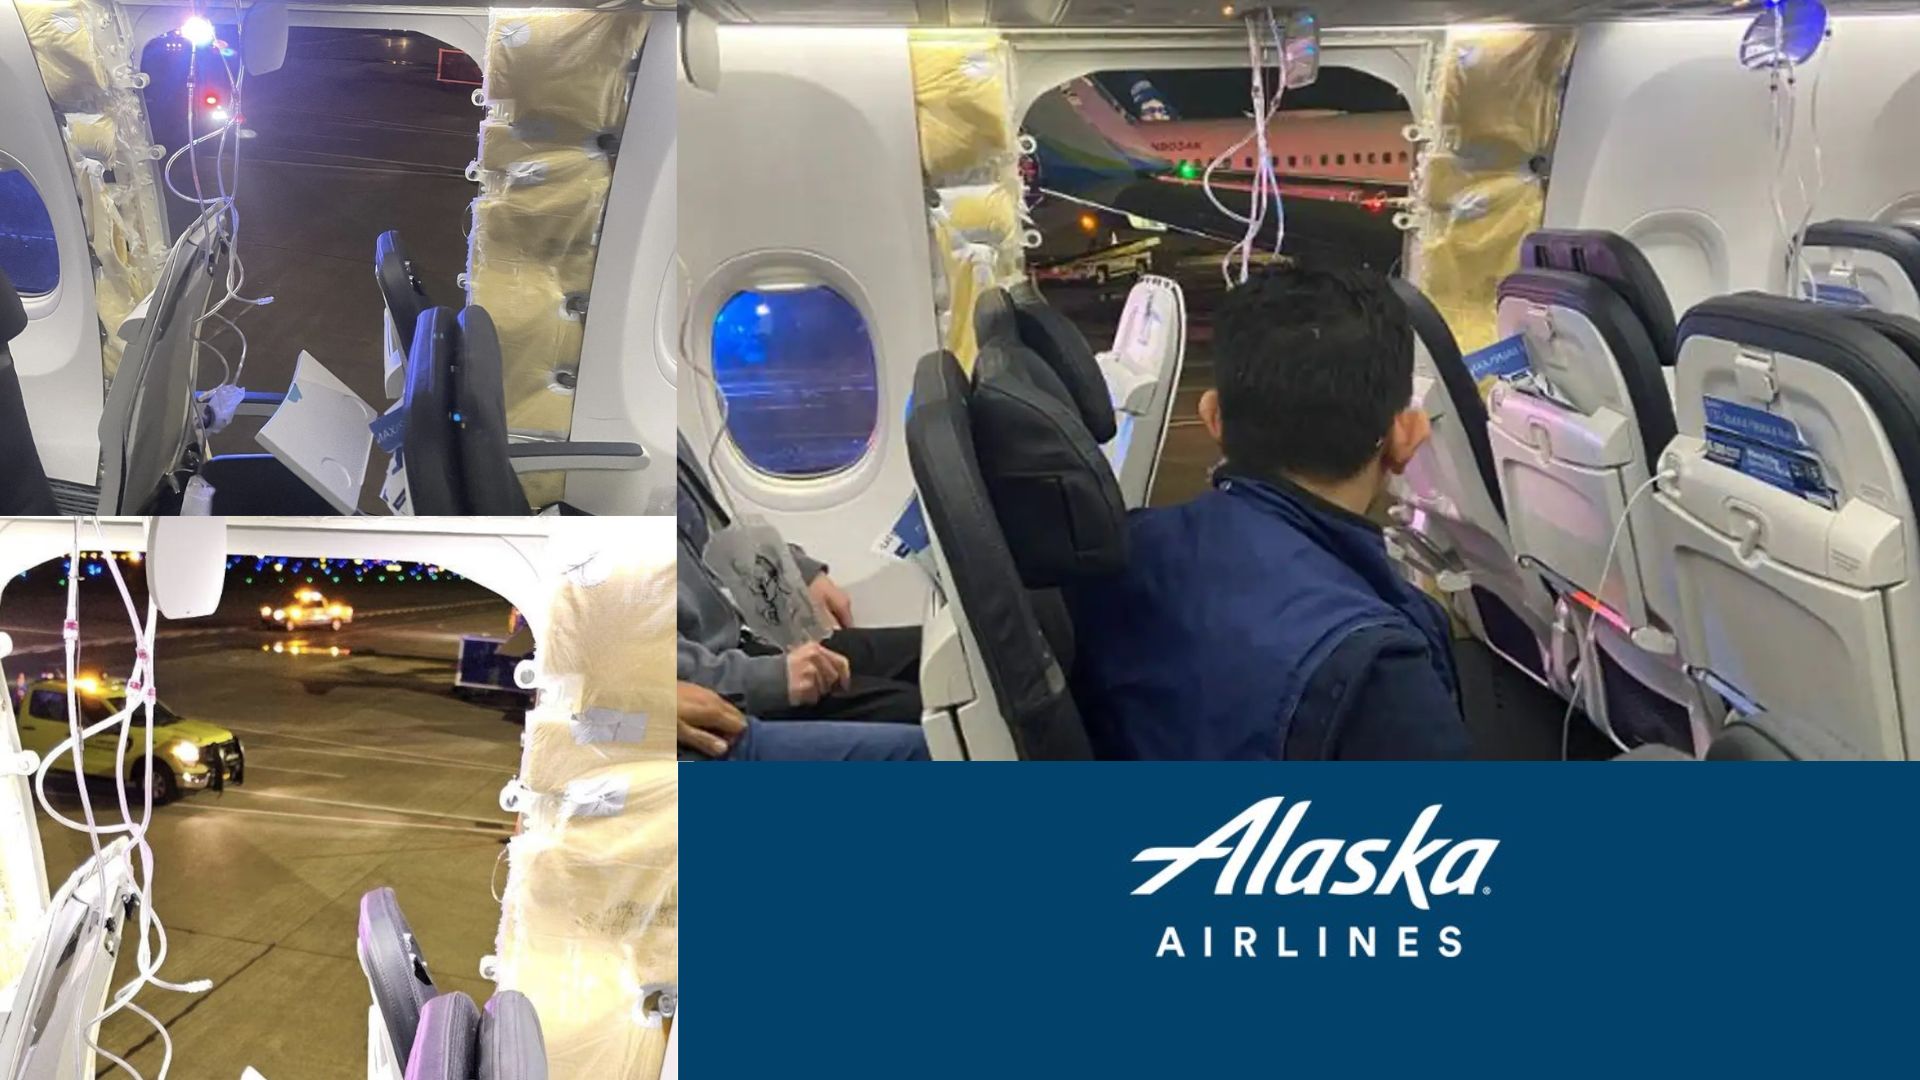 Alaska Airlines Boeing 737 MAX Faces Emergency as Door Blows Open Mid-Air